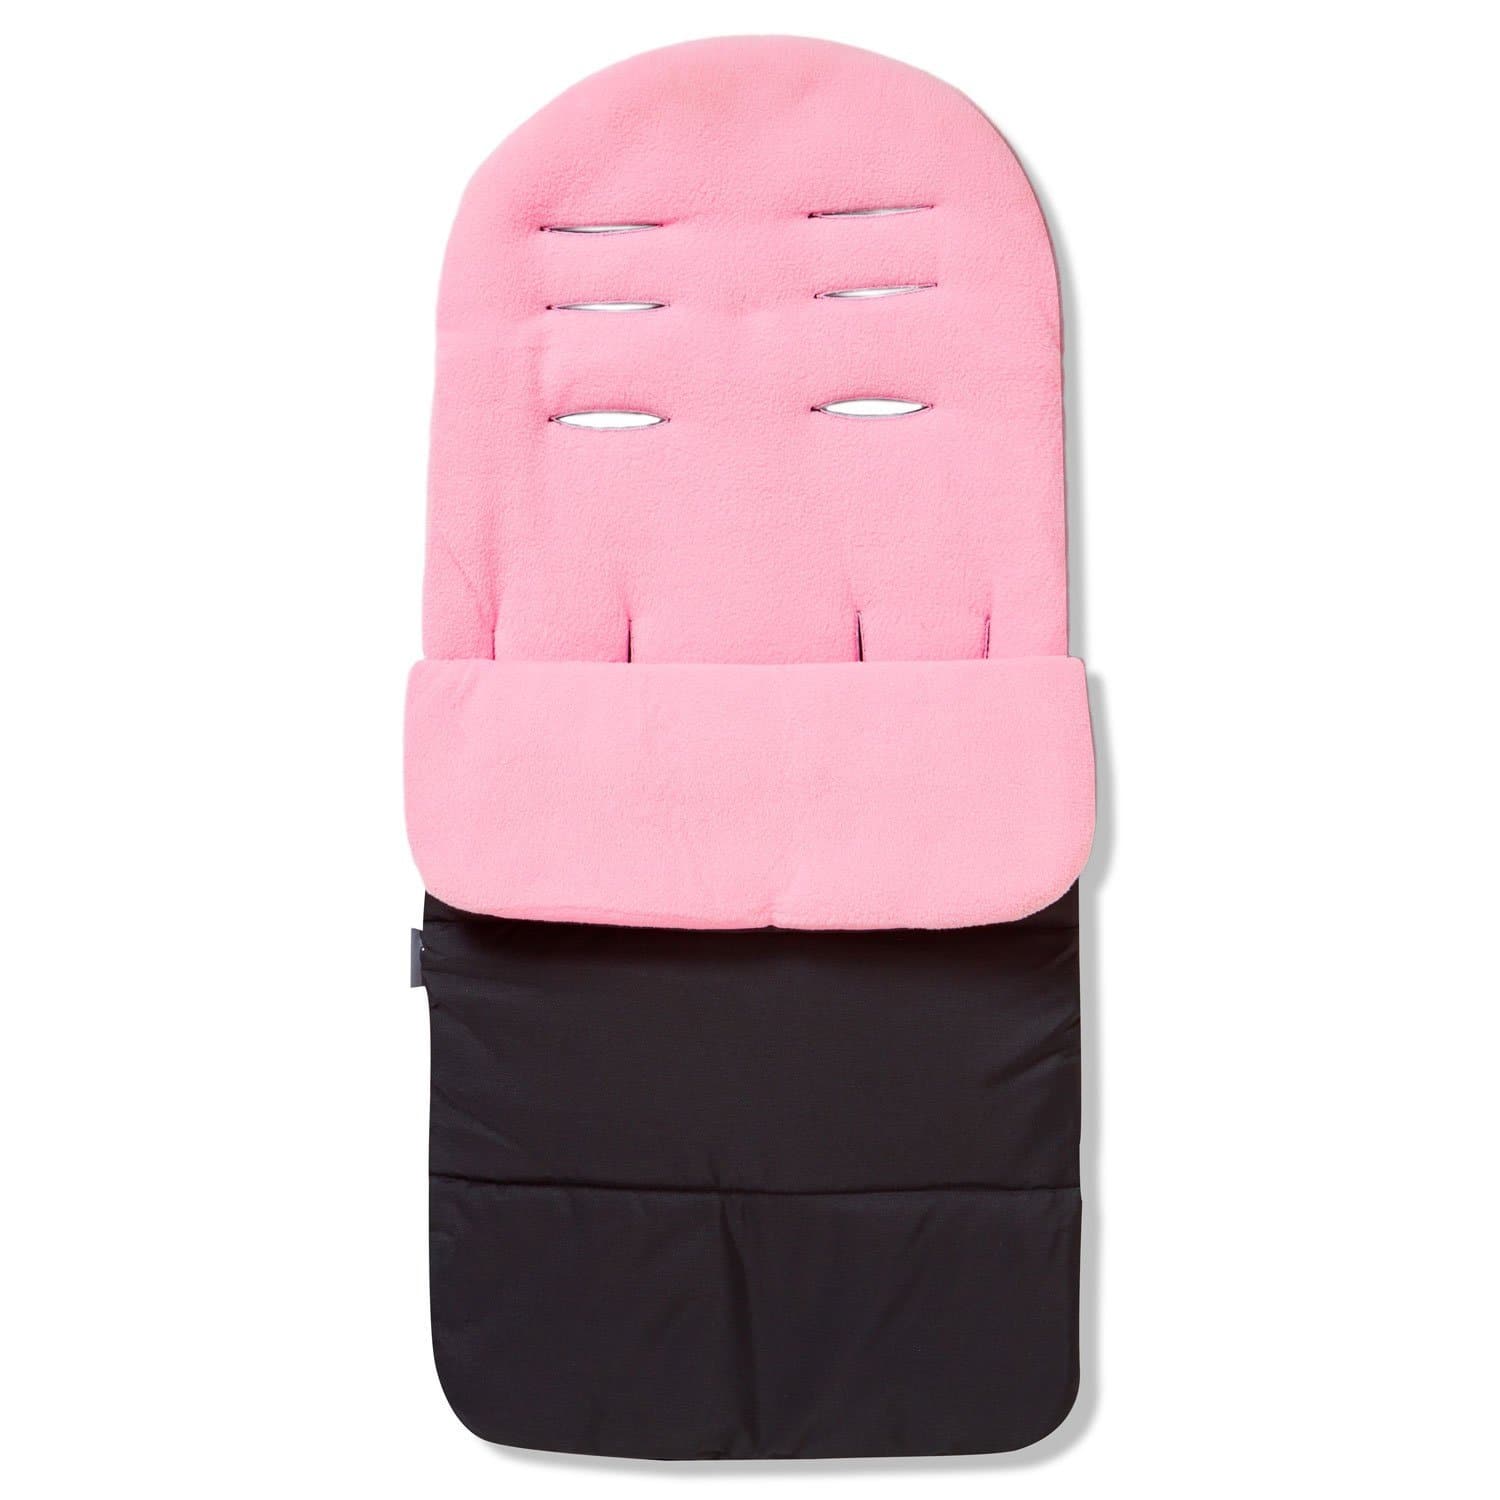 Premium Footmuff / Cosy Toes Compatible with Noukies - Candy Pink / Fits All Models | For Your Little One